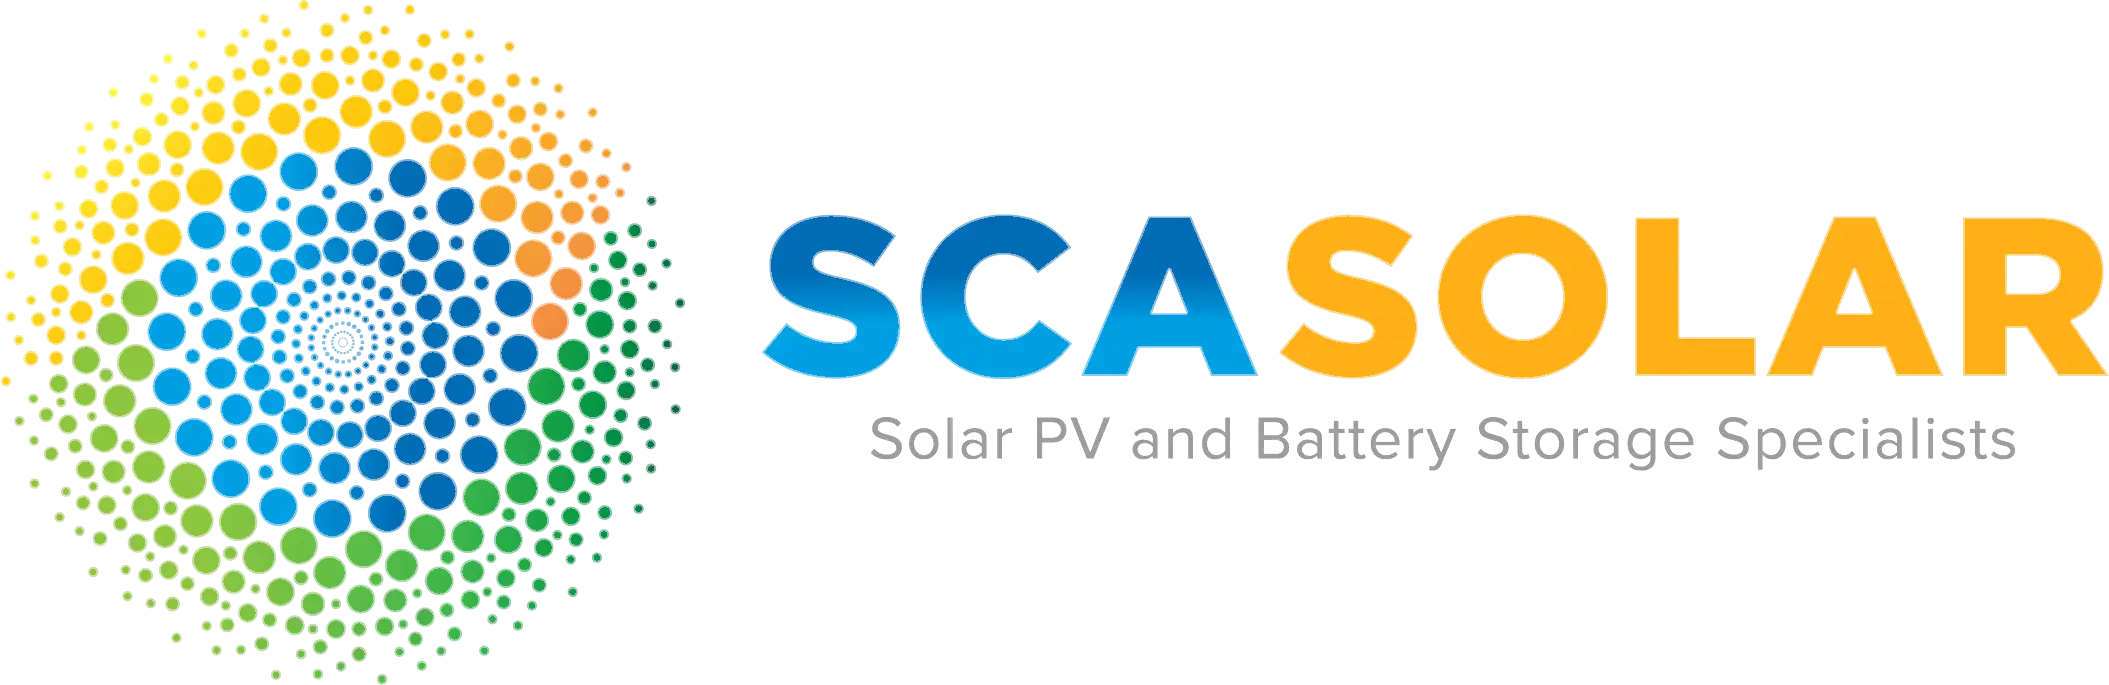 Logo of scasolar with the text "scasolar" in bold blue and yellow letters emphasizing their specialization in solar pv and battery storage.